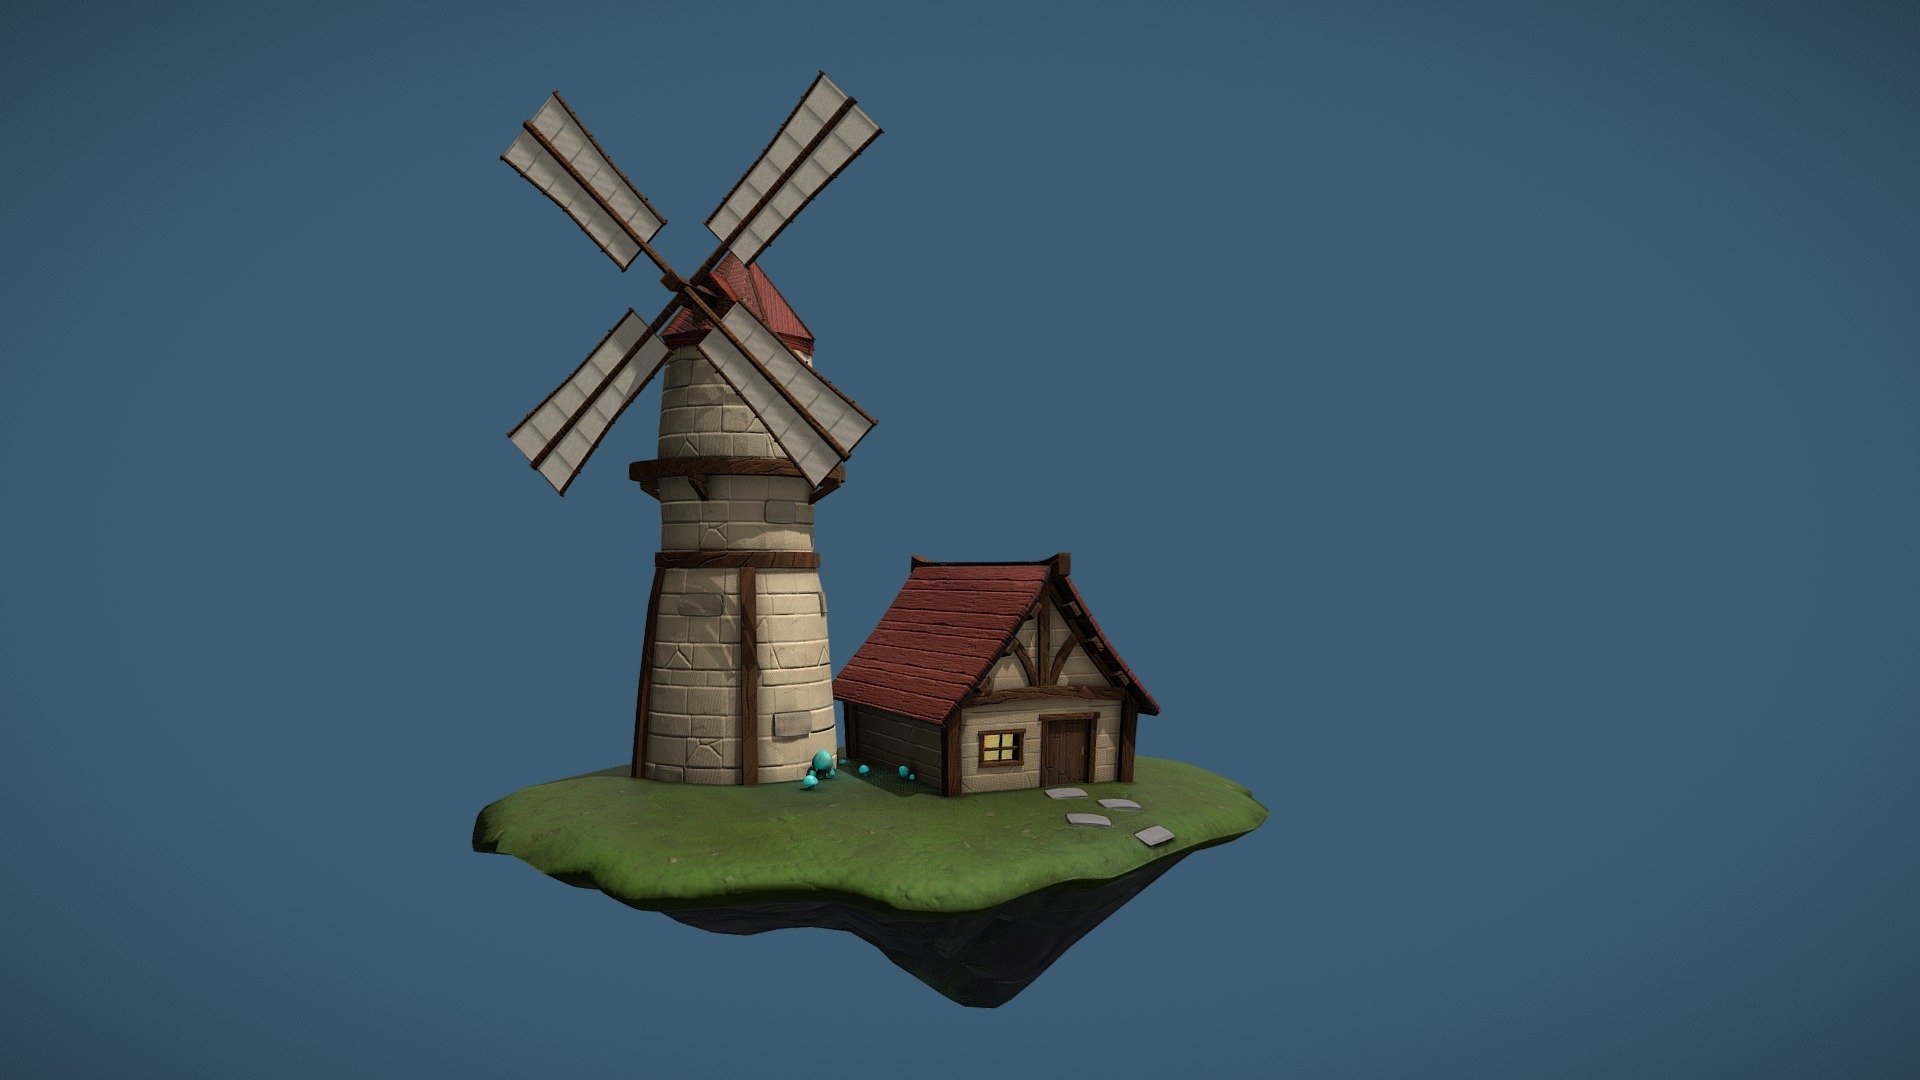 Windmill for 3D modelling Uni project. [edit: was all quads but sketchfab's changed them to triangles for some reason.] - Fantasy Windmill - 3D model by matt (@matthewshannon) 3d model